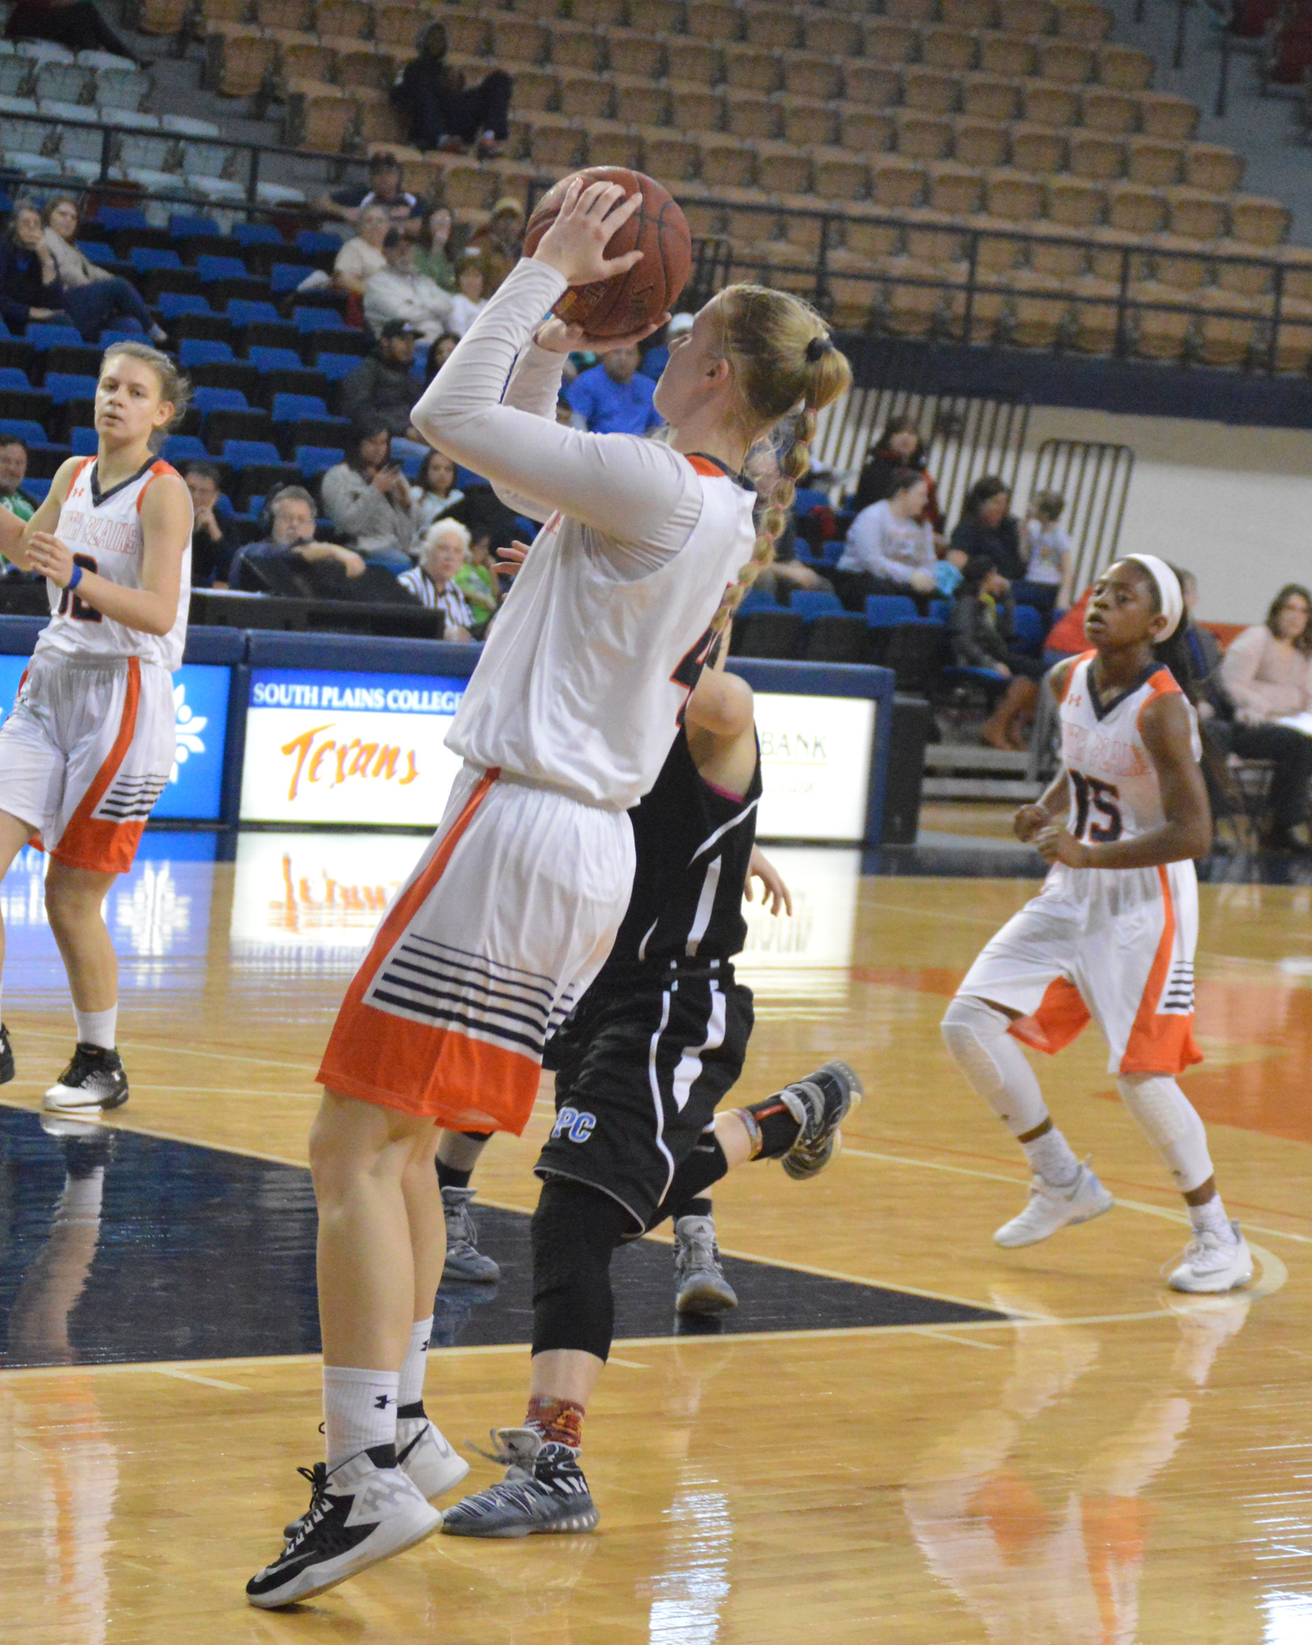 Inkina's 16 points leads the No. 7 Lady Texans to a 68-30 rout of Otero